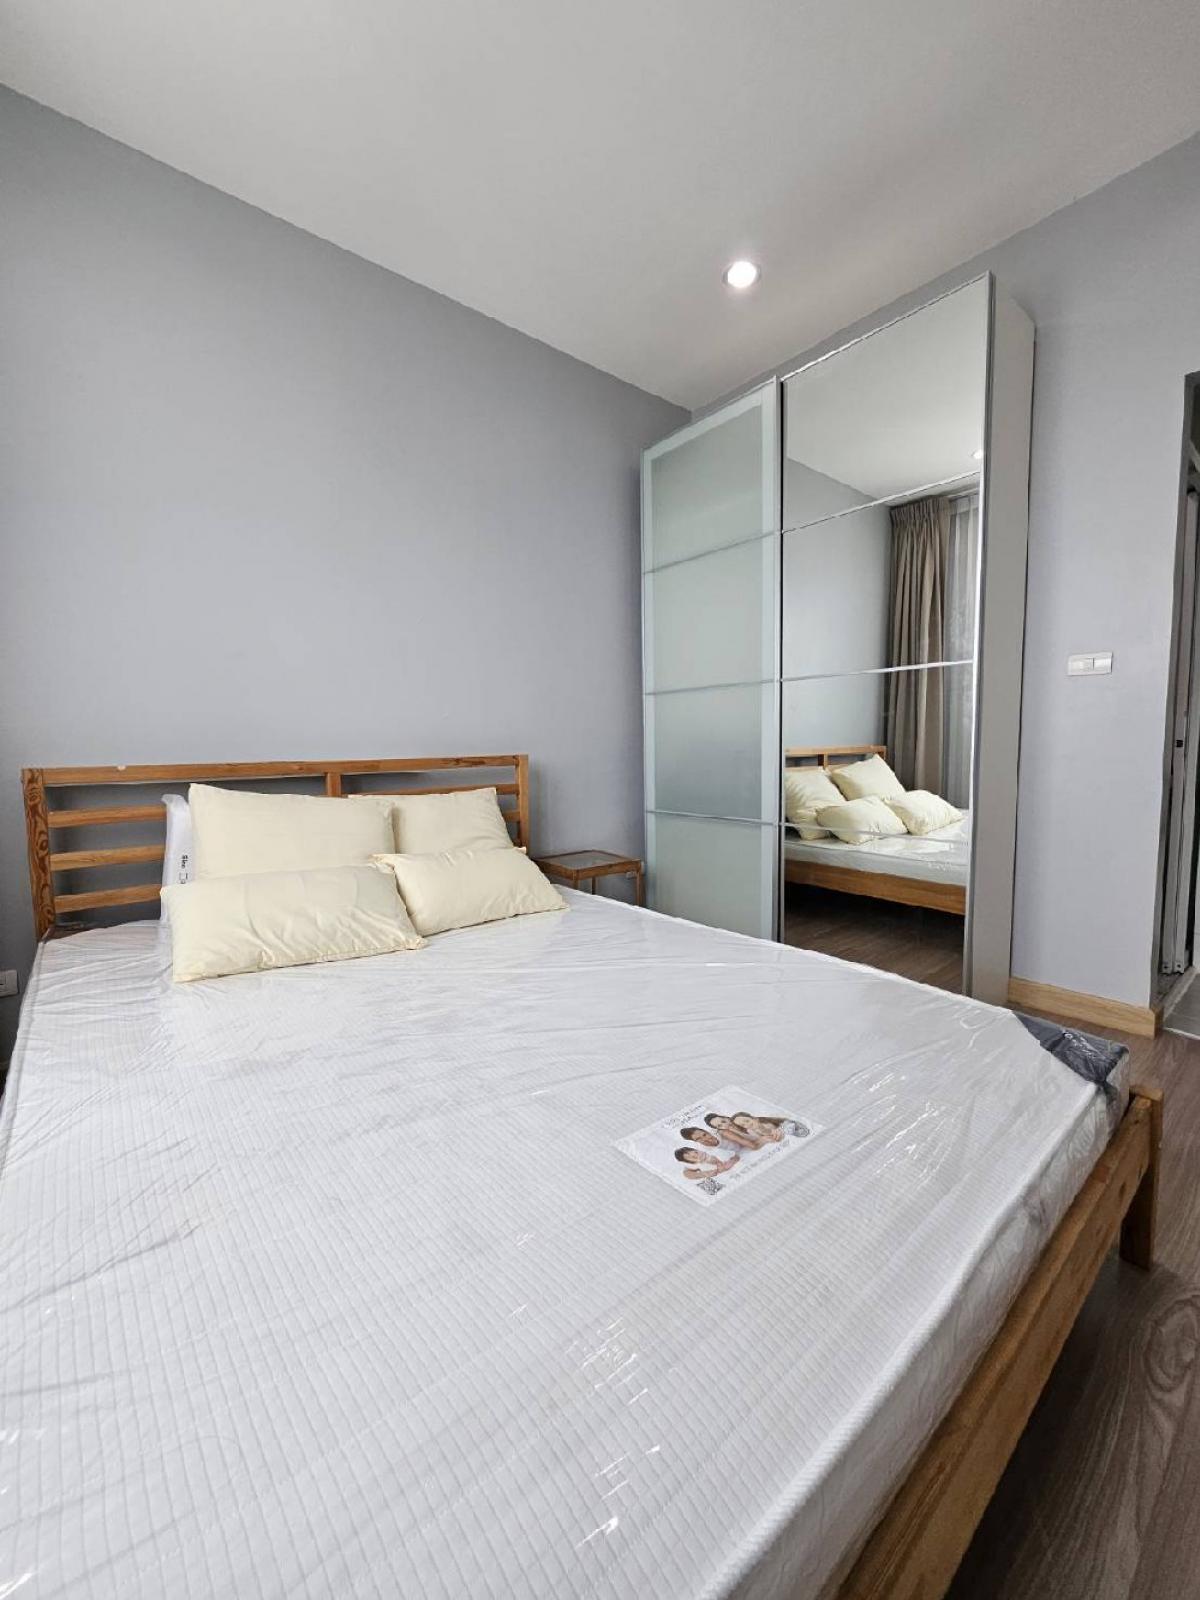 For SaleCondoChaengwatana, Muangthong : 🏬🚅New condo for sale, very close to Astro Chaengwattana BTS, next to the Pink Line BTS. The room is fully decorated, very new, never lived in.